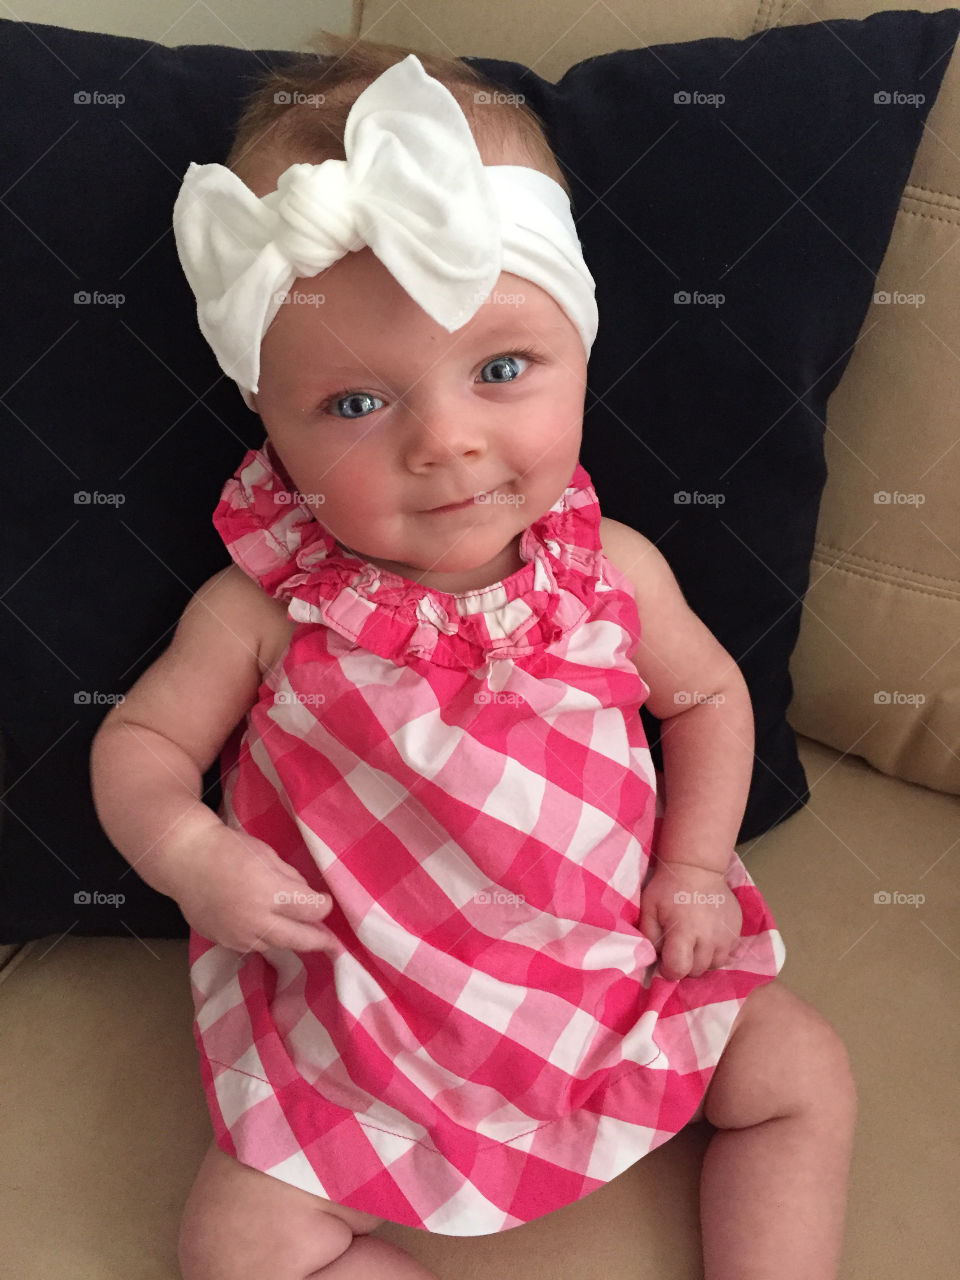 Smiling cute baby girl with white headband